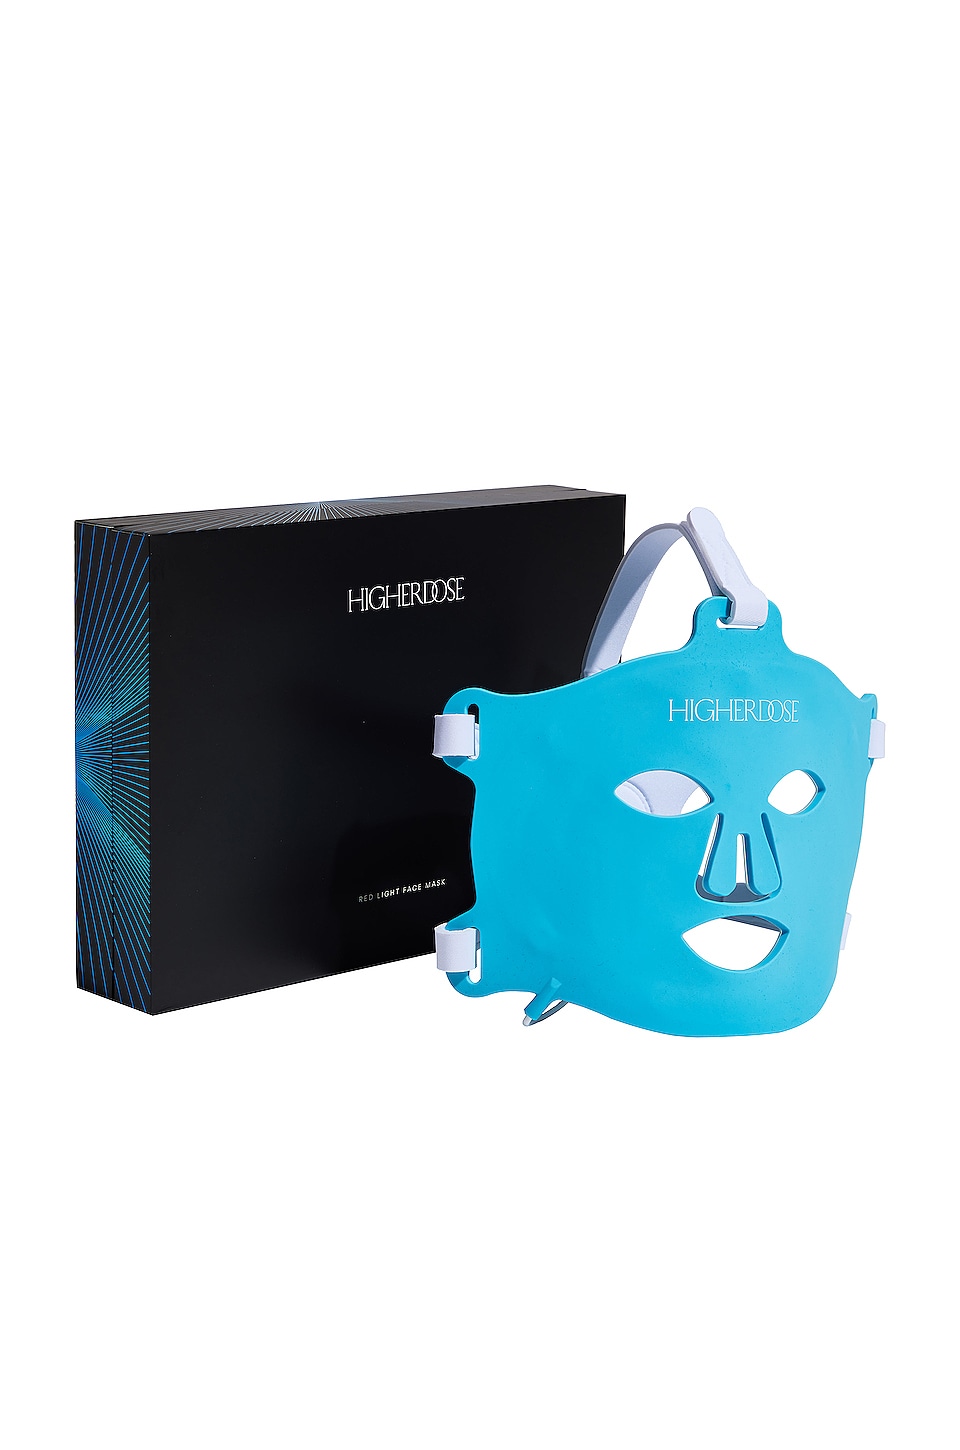 HigherDOSE Red Light Face Mask in blue color with black box/case.